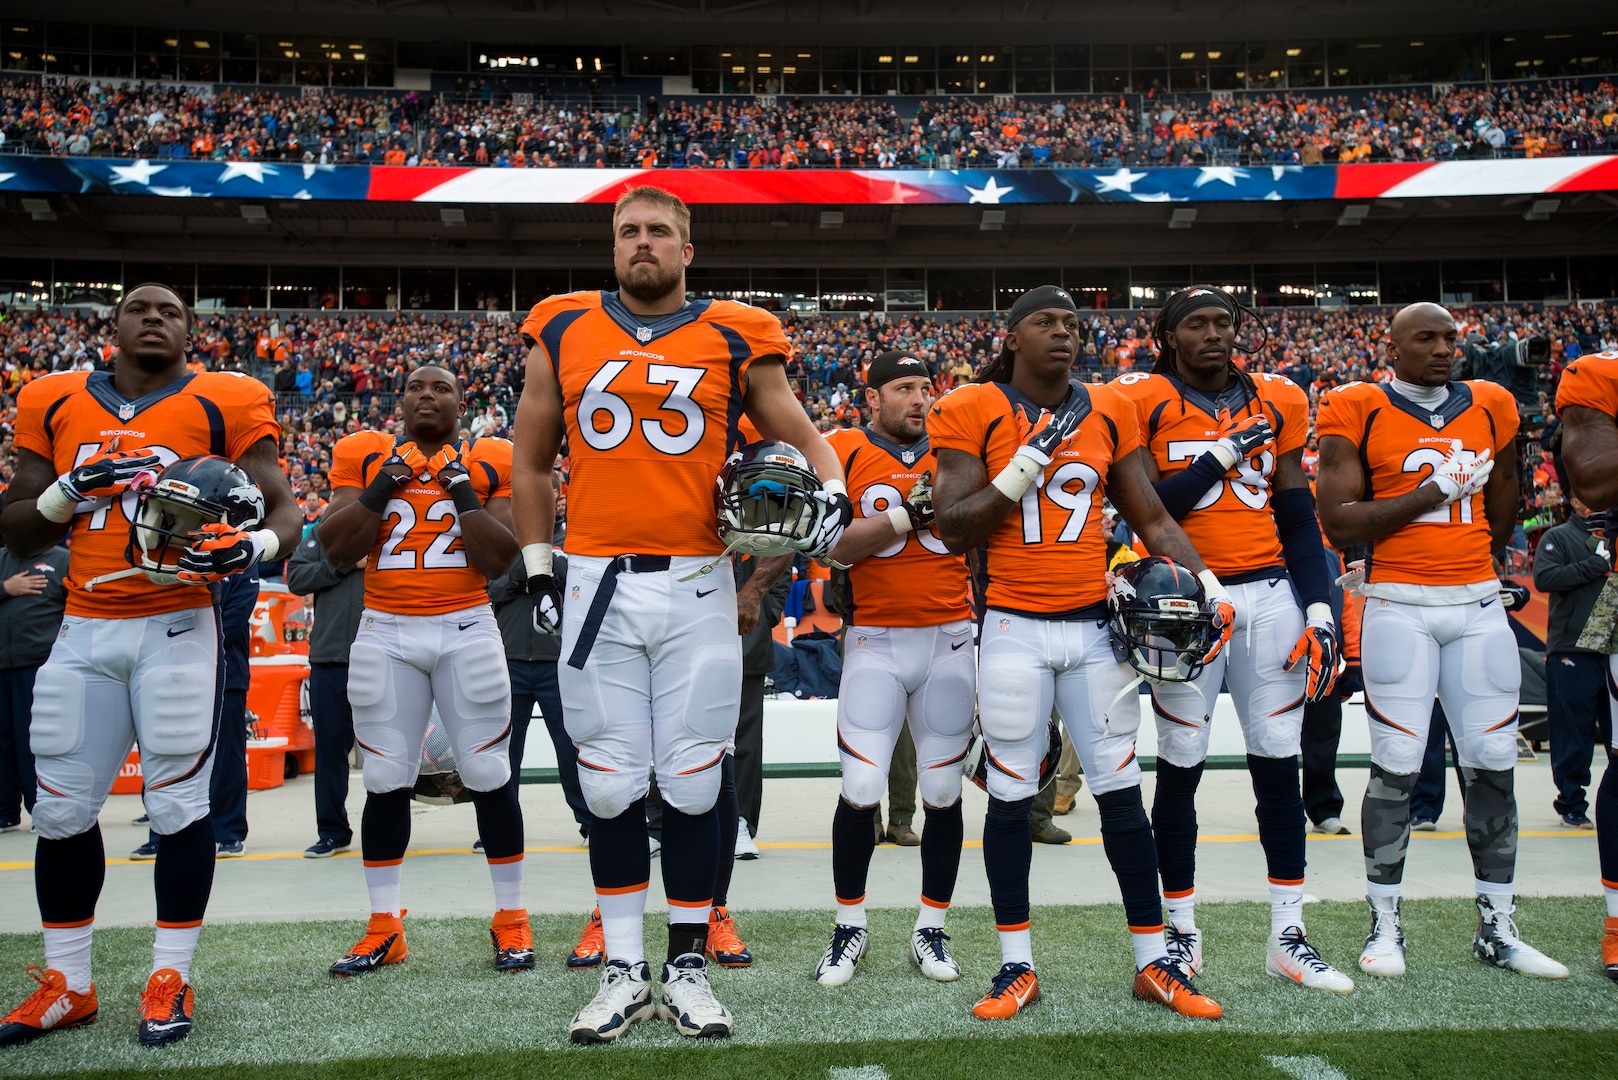 Broncos' player says military helped in pursuit of football jersey >  National Guard > Article View